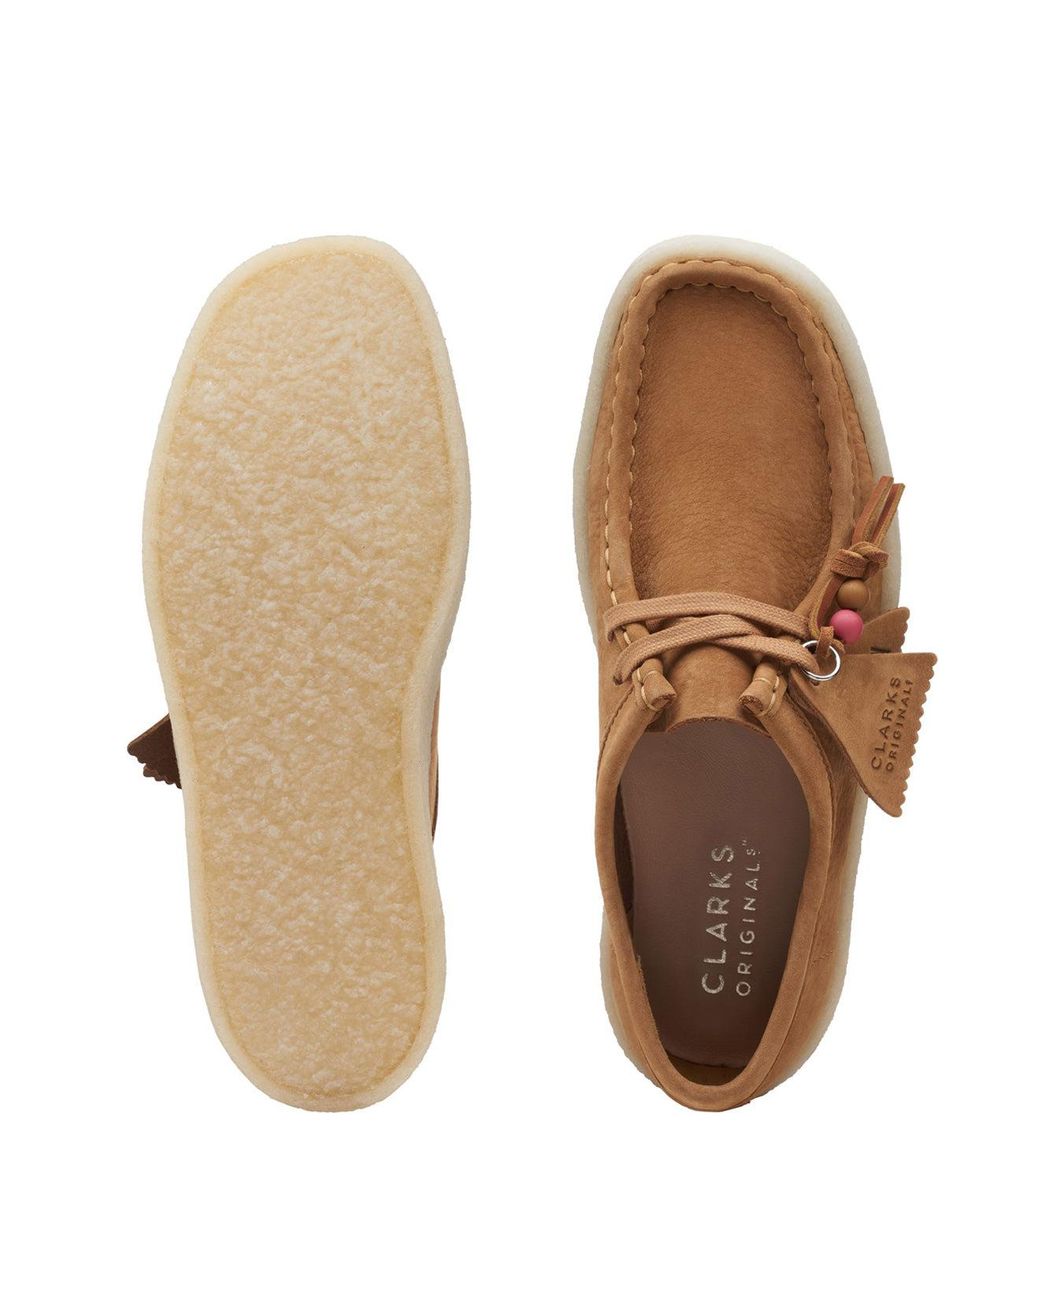 Clarks Rubber Wallabee Cup Shoes Tan Nubuck in Brown - Save 1% | Lyst